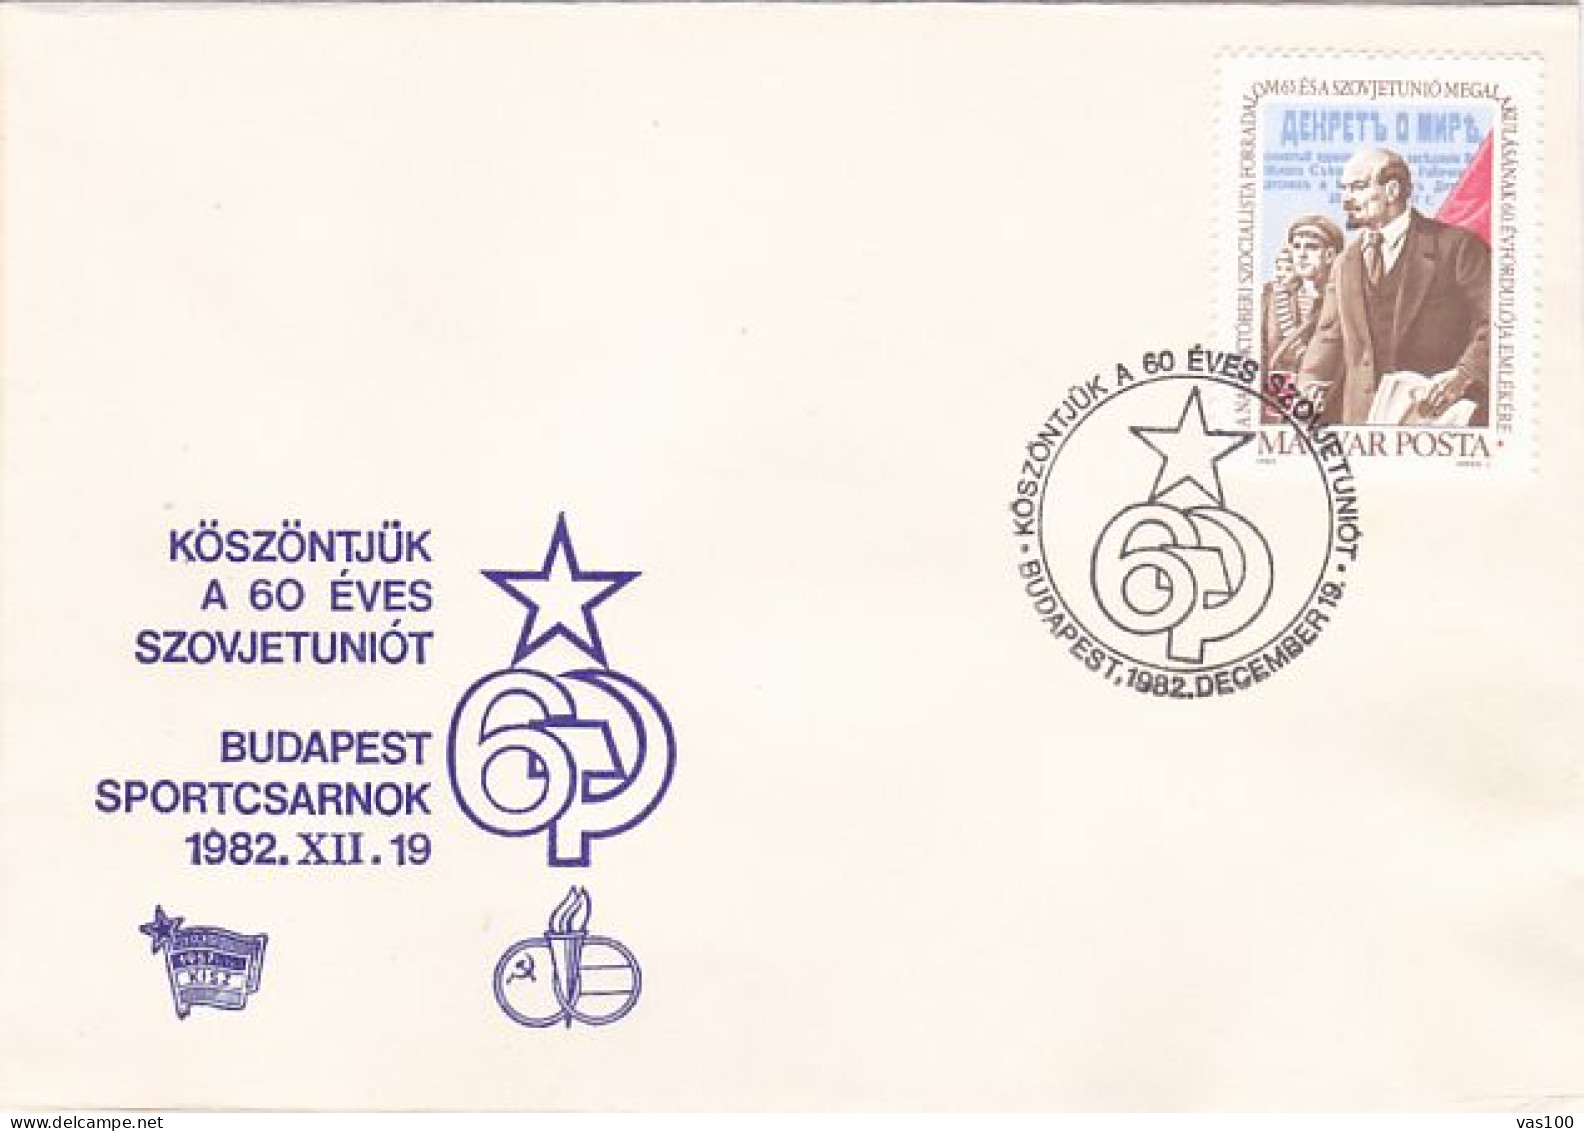 SOVIET UNION ANNIVERSARY, BUDAPEST PHILATELIC EXHIBITION, SPECIAL COVER, 1982, HUNGARY - Lettres & Documents